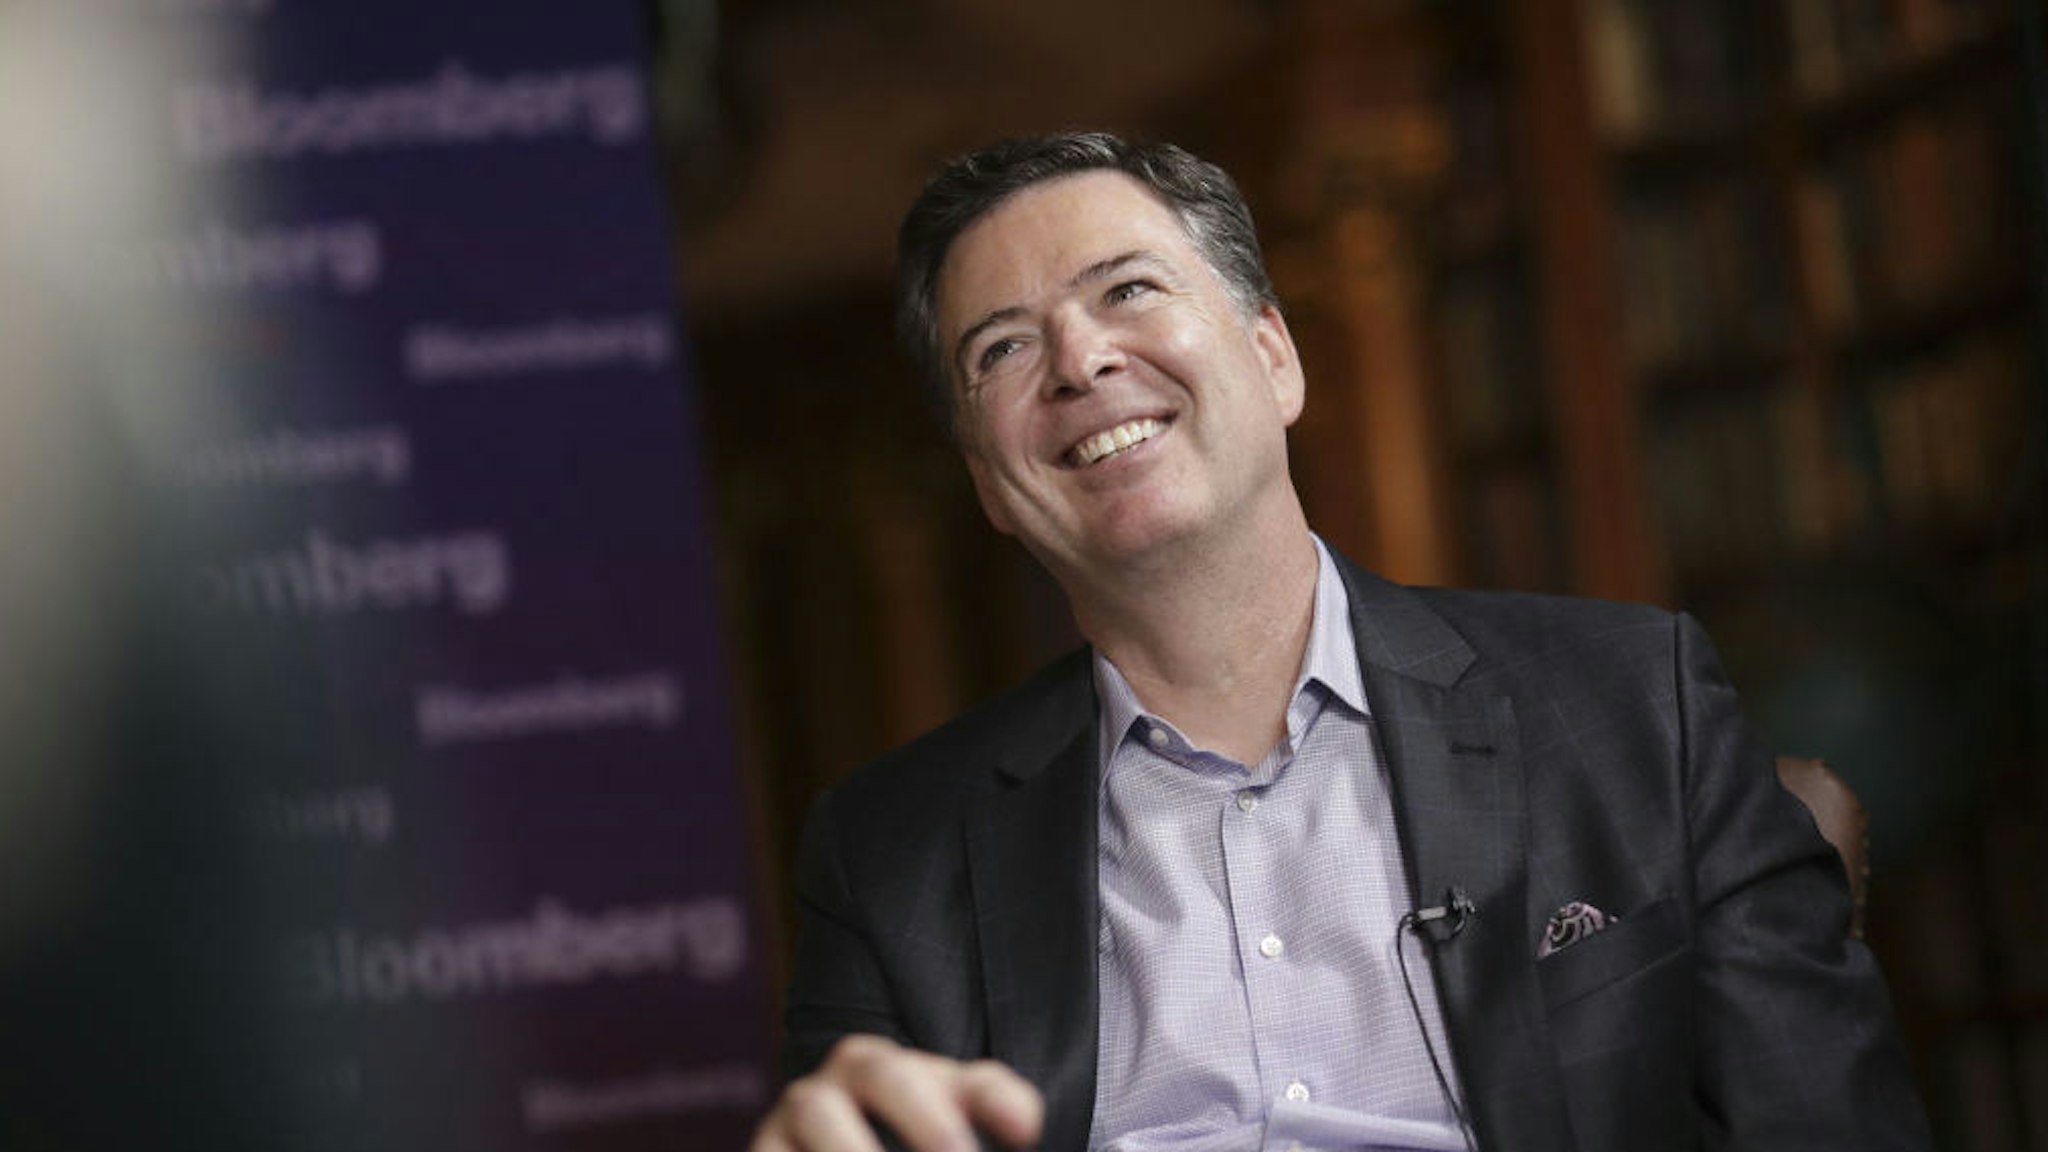 James Comey, former director of the Federal Bureau of Investigation (FBI), reacts during a Bloomberg Television interview in Salzburg, Austria, on Friday, June 21, 2019. Comey said he hopes President Donald Trump isn’t impeached because "that would let the American people off the hook."